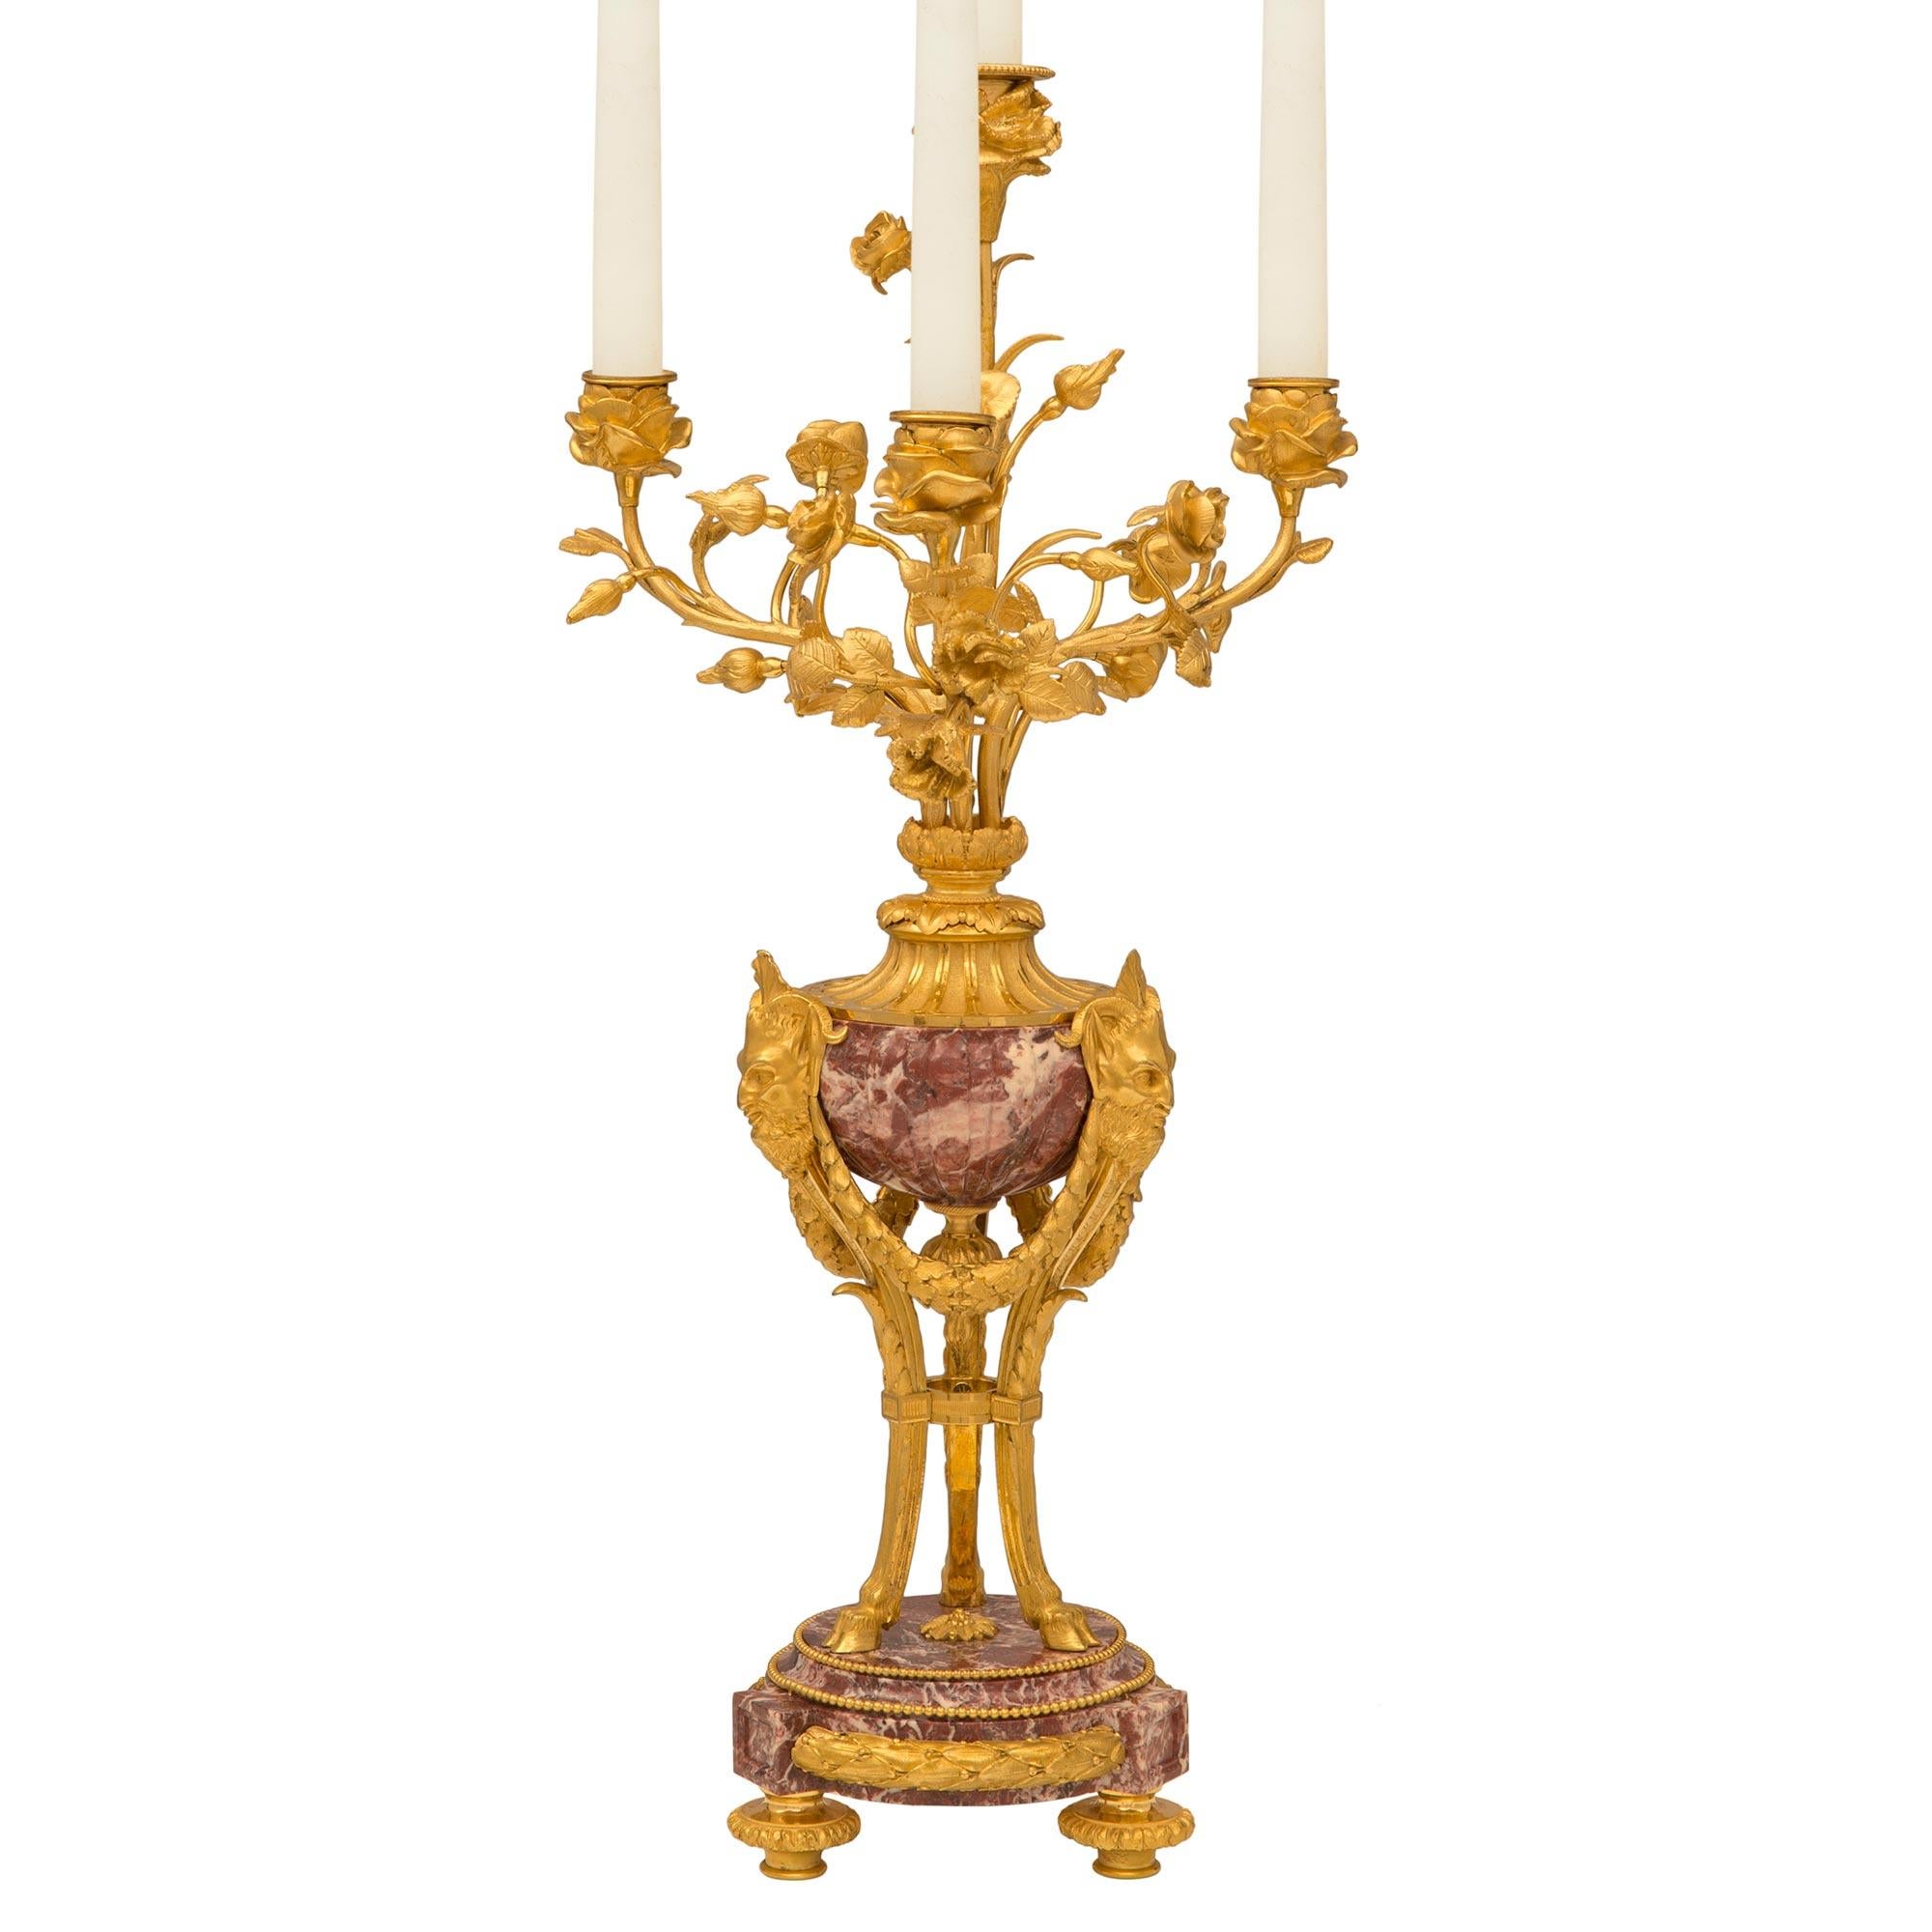 A beautiful and extremely high quality pair of French 19th century Louis XVI st. ormolu and Fleur de Pêcher marble candelabras. Each four arm candelabra is raised by three ormolu topie shaped feet below the exceptional double mottled circular Fleur